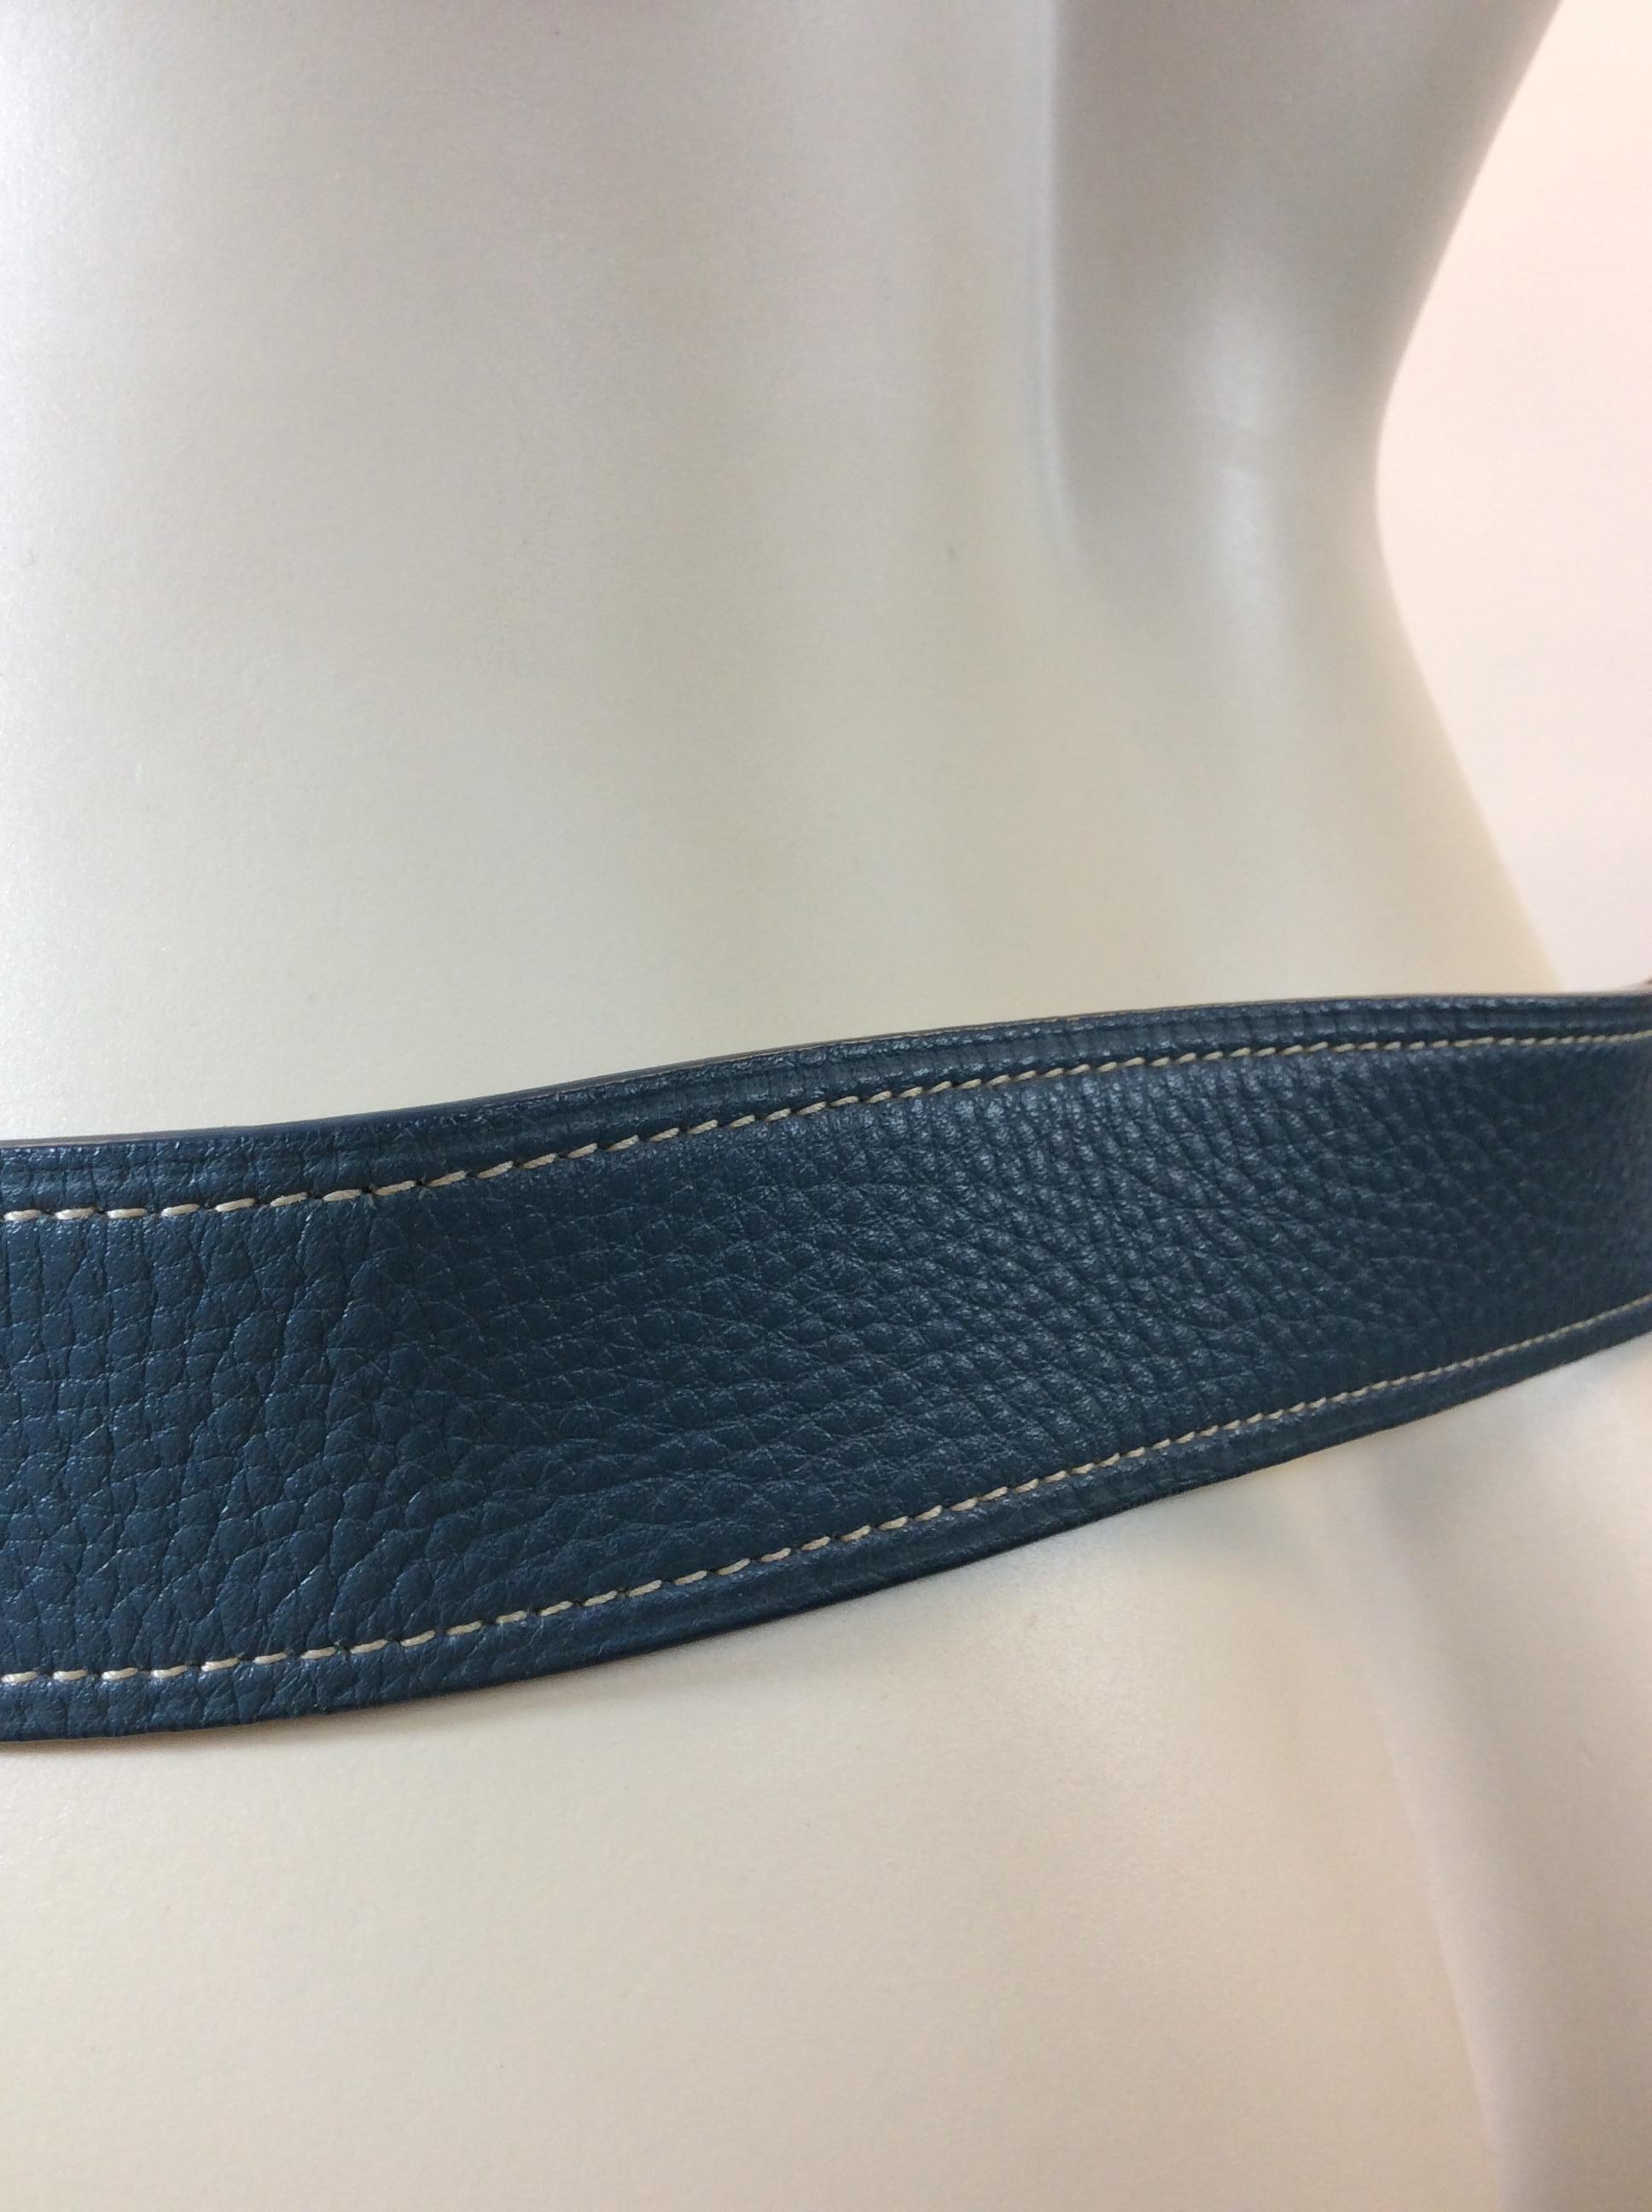 Prada Blue Leather Belt In Good Condition For Sale In Narberth, PA